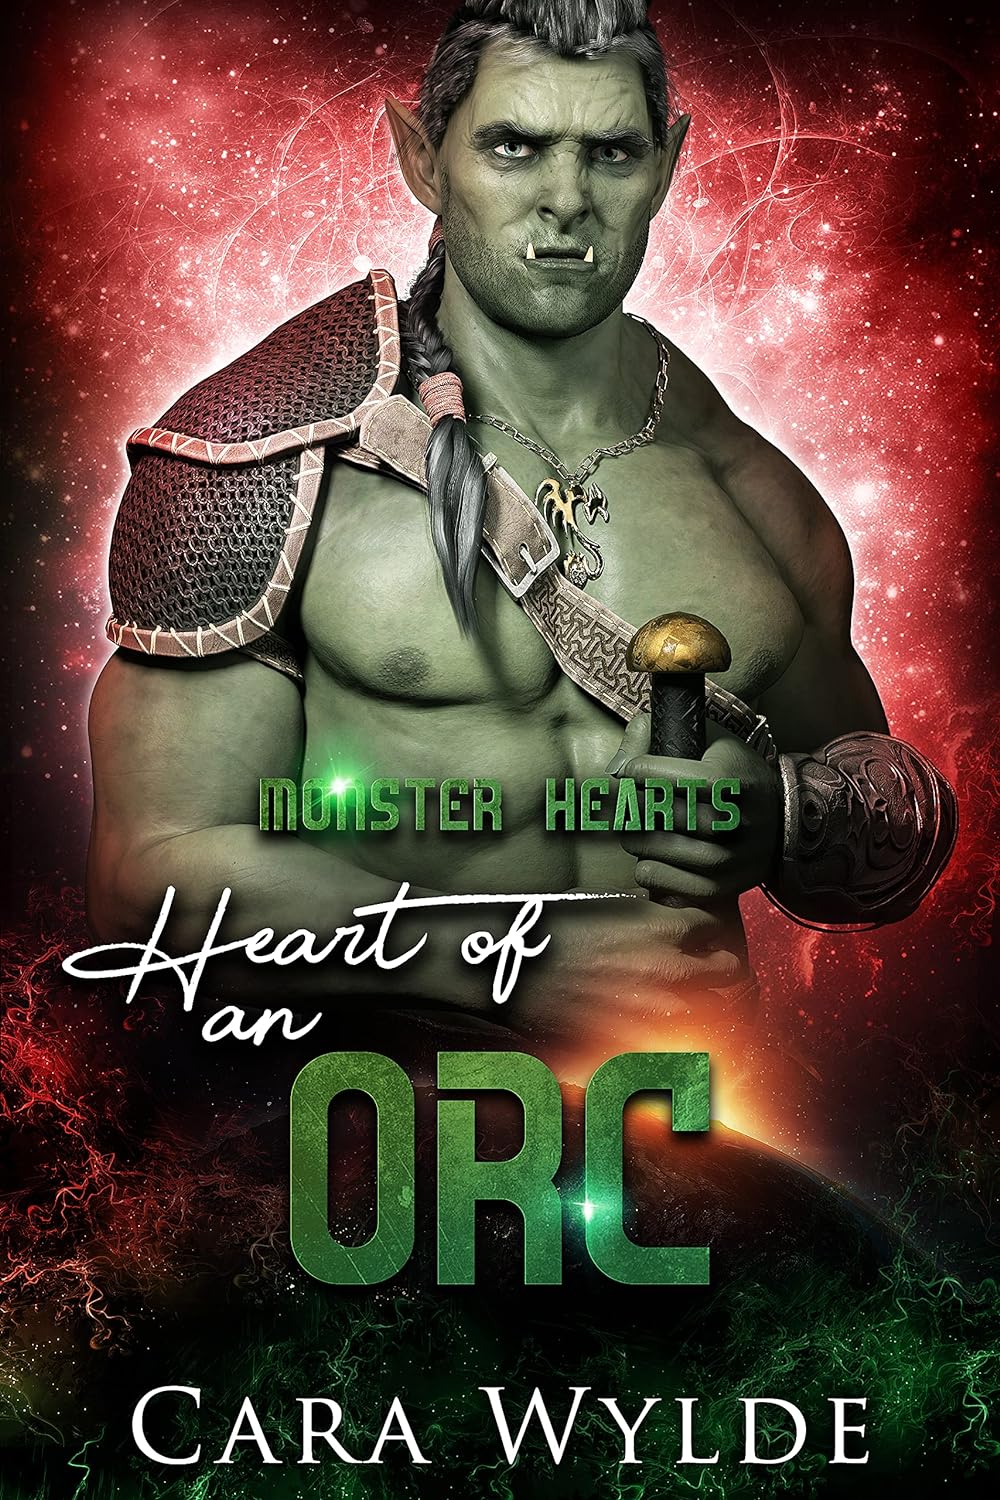 Heart of an Orc by Cara Wylde